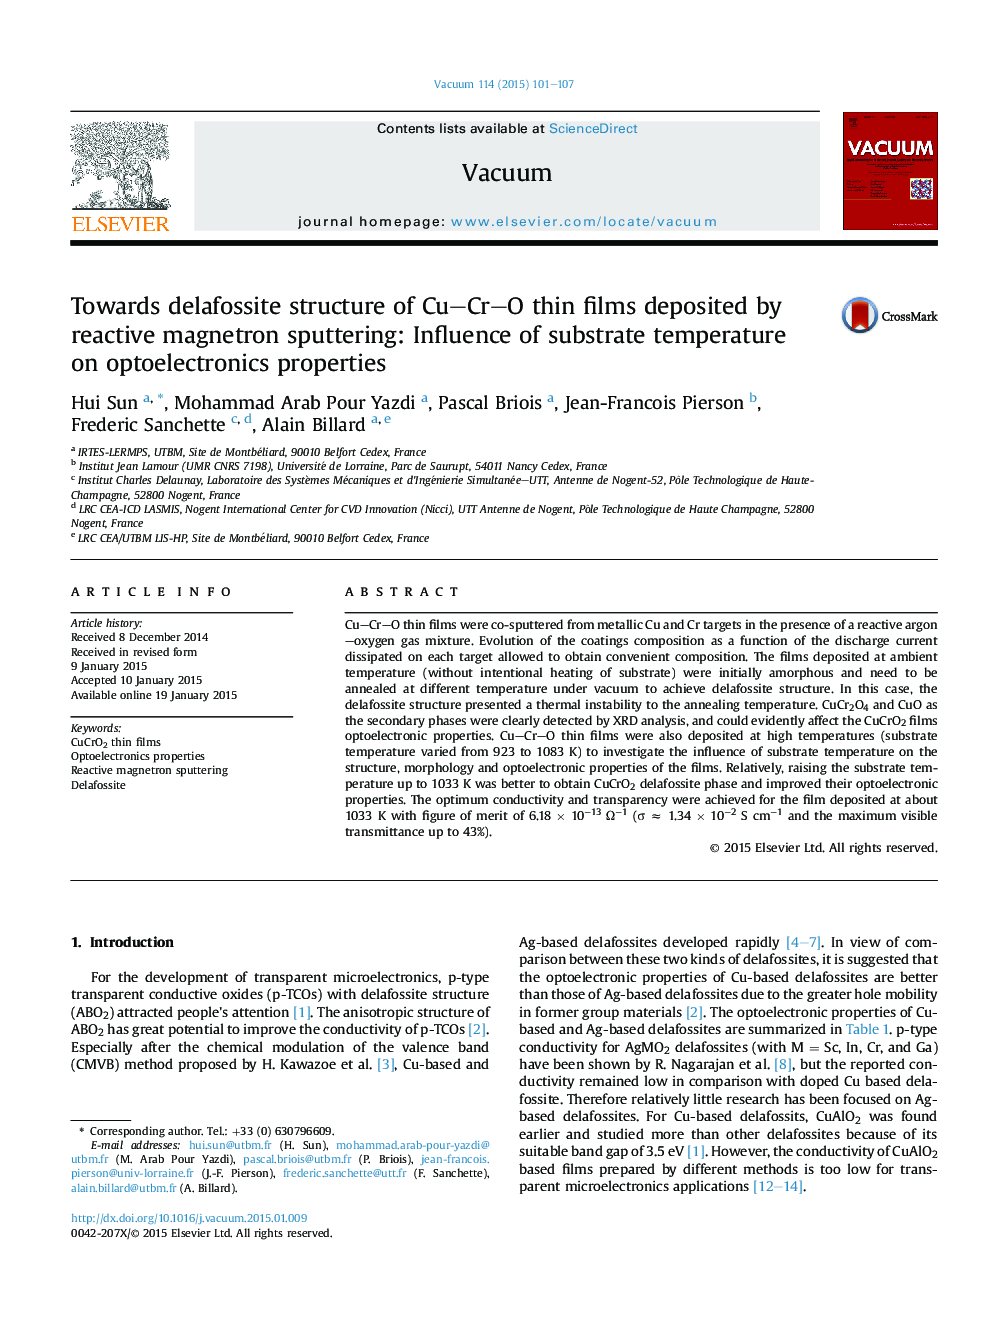 Towards delafossite structure of Cu–Cr–O thin films deposited by reactive magnetron sputtering: Influence of substrate temperature on optoelectronics properties